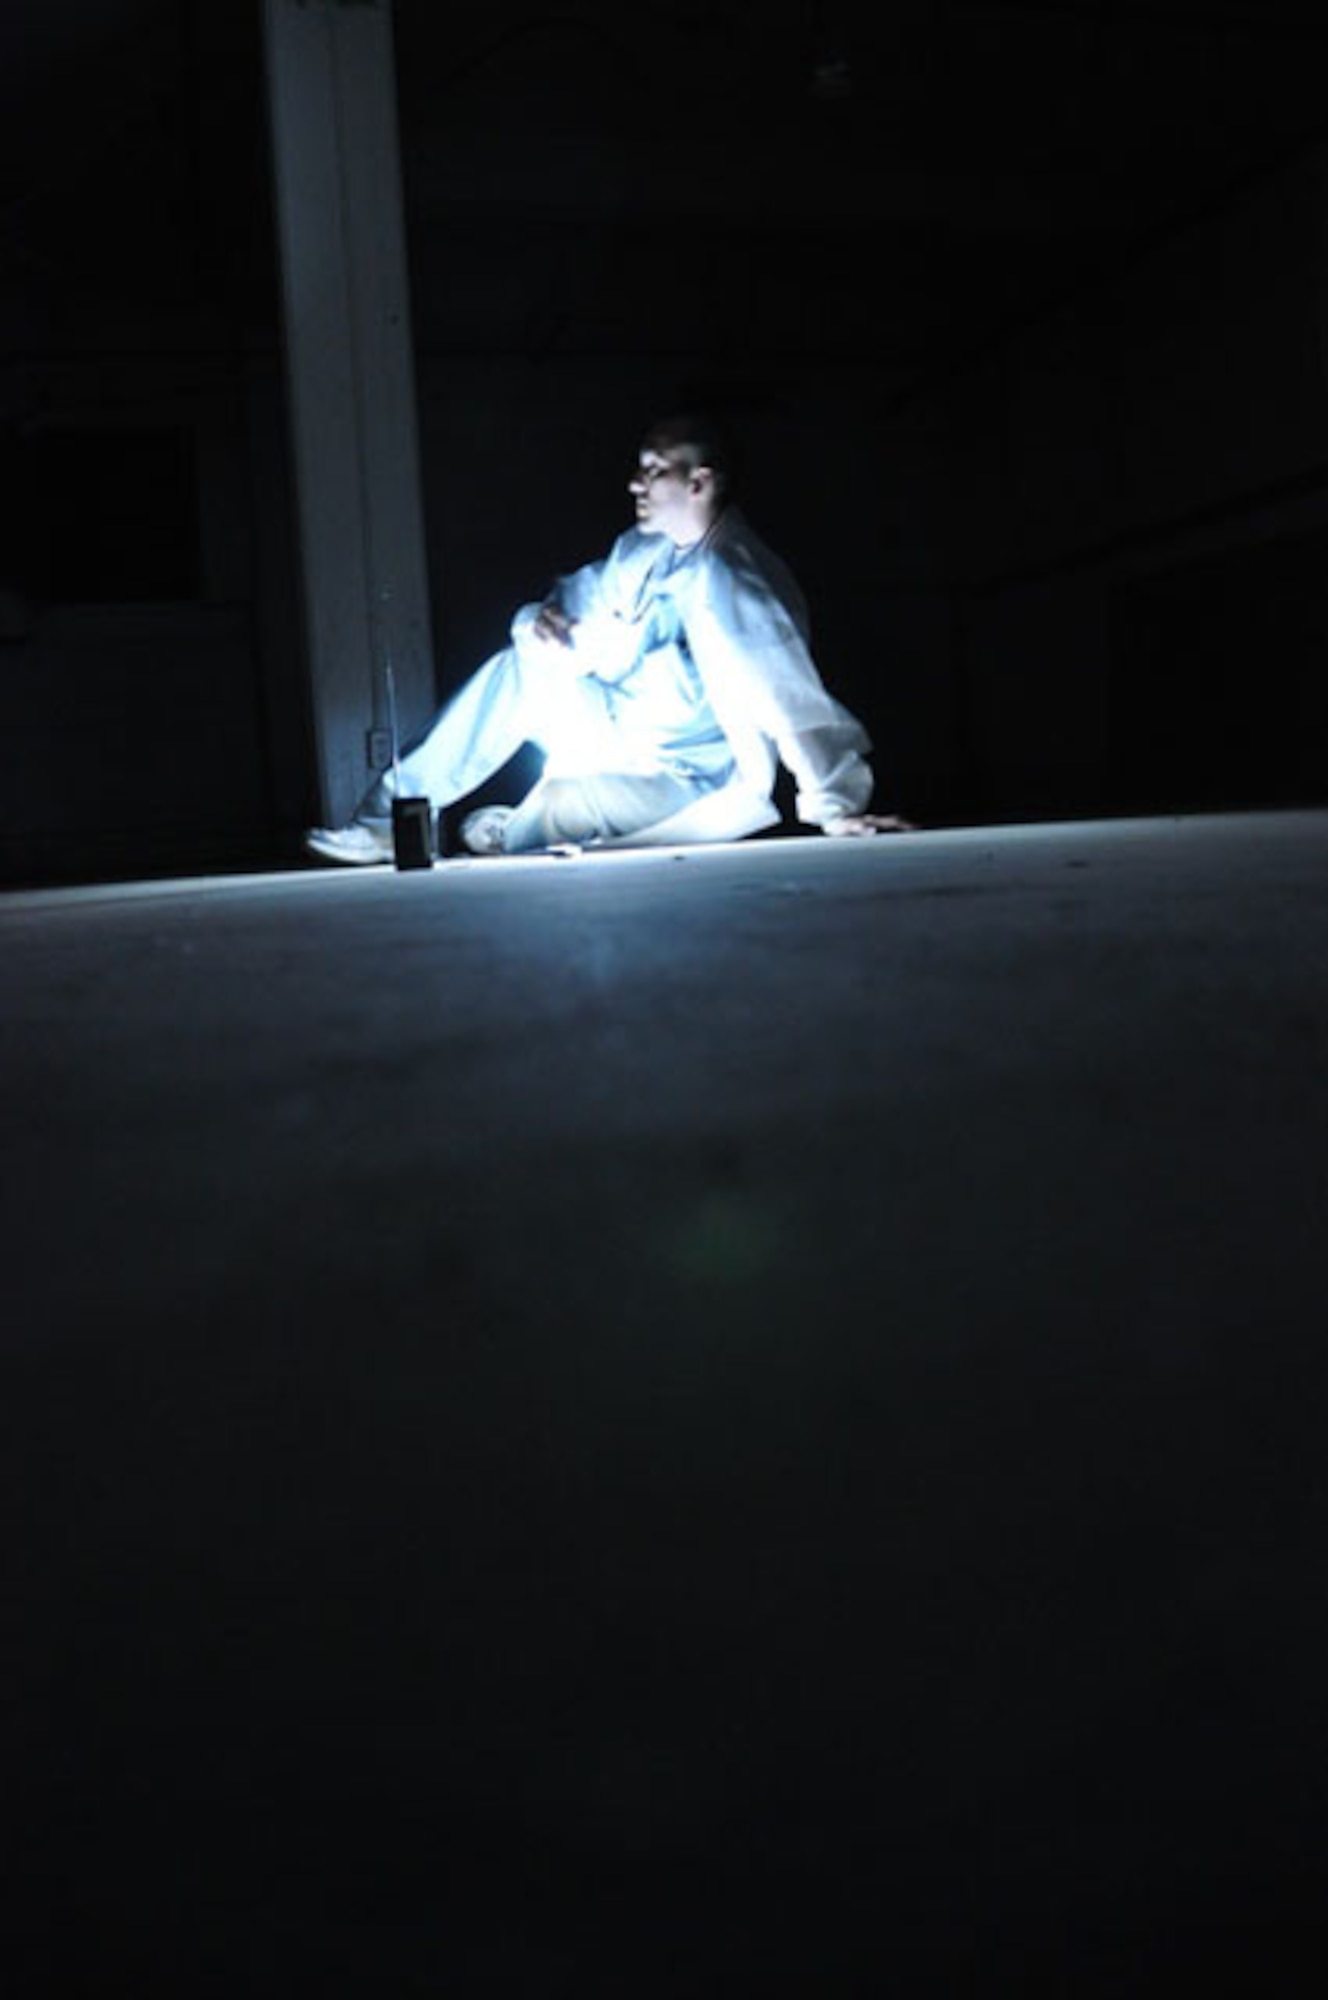 Senior Airman Jose Mora, 452nd Aerospace Medicine Squadron, wears a lab coat and stethoscope during an April 20, 2013 paranormal investigation, hoping it would put spirits at ease while investigating a former medical facility at March Field. Here Mora sits in the dark asking questions to prompt replies through an Electronic Voice Phonomina recorder. (U.S. Air Force photo/Linda Welz)